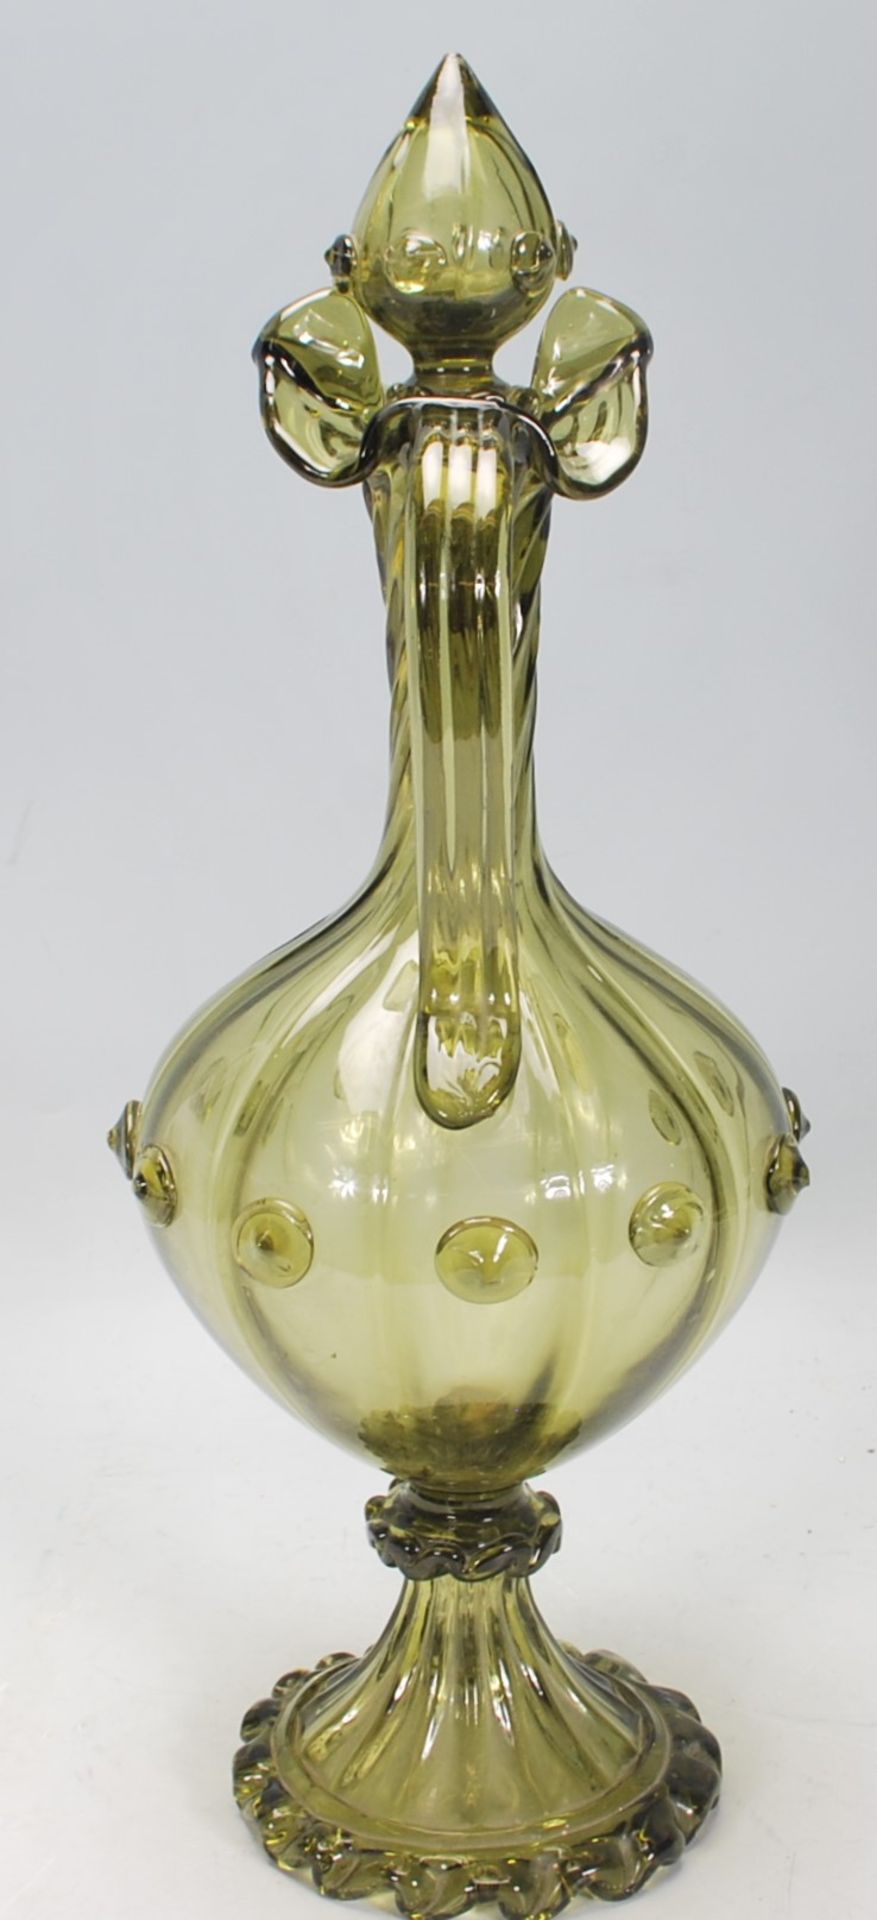 A 20th Century Murano green glass ewer jug having a reeded bulbous form body with a twisted neck, - Image 4 of 6